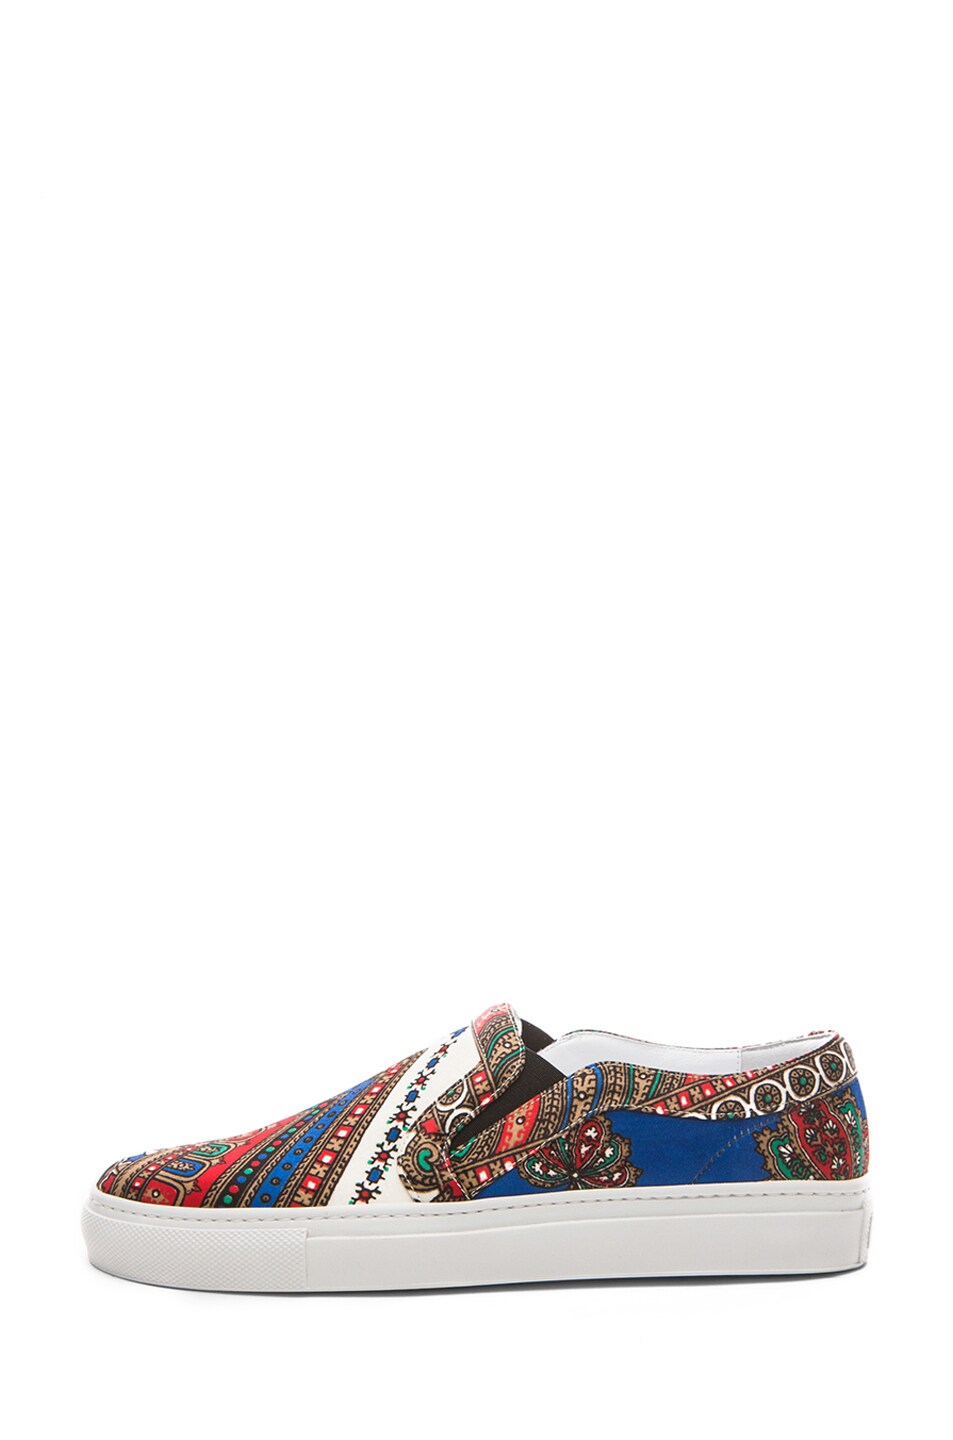 Image 1 of Givenchy Satin Printed Twill Slip Ons in Multi